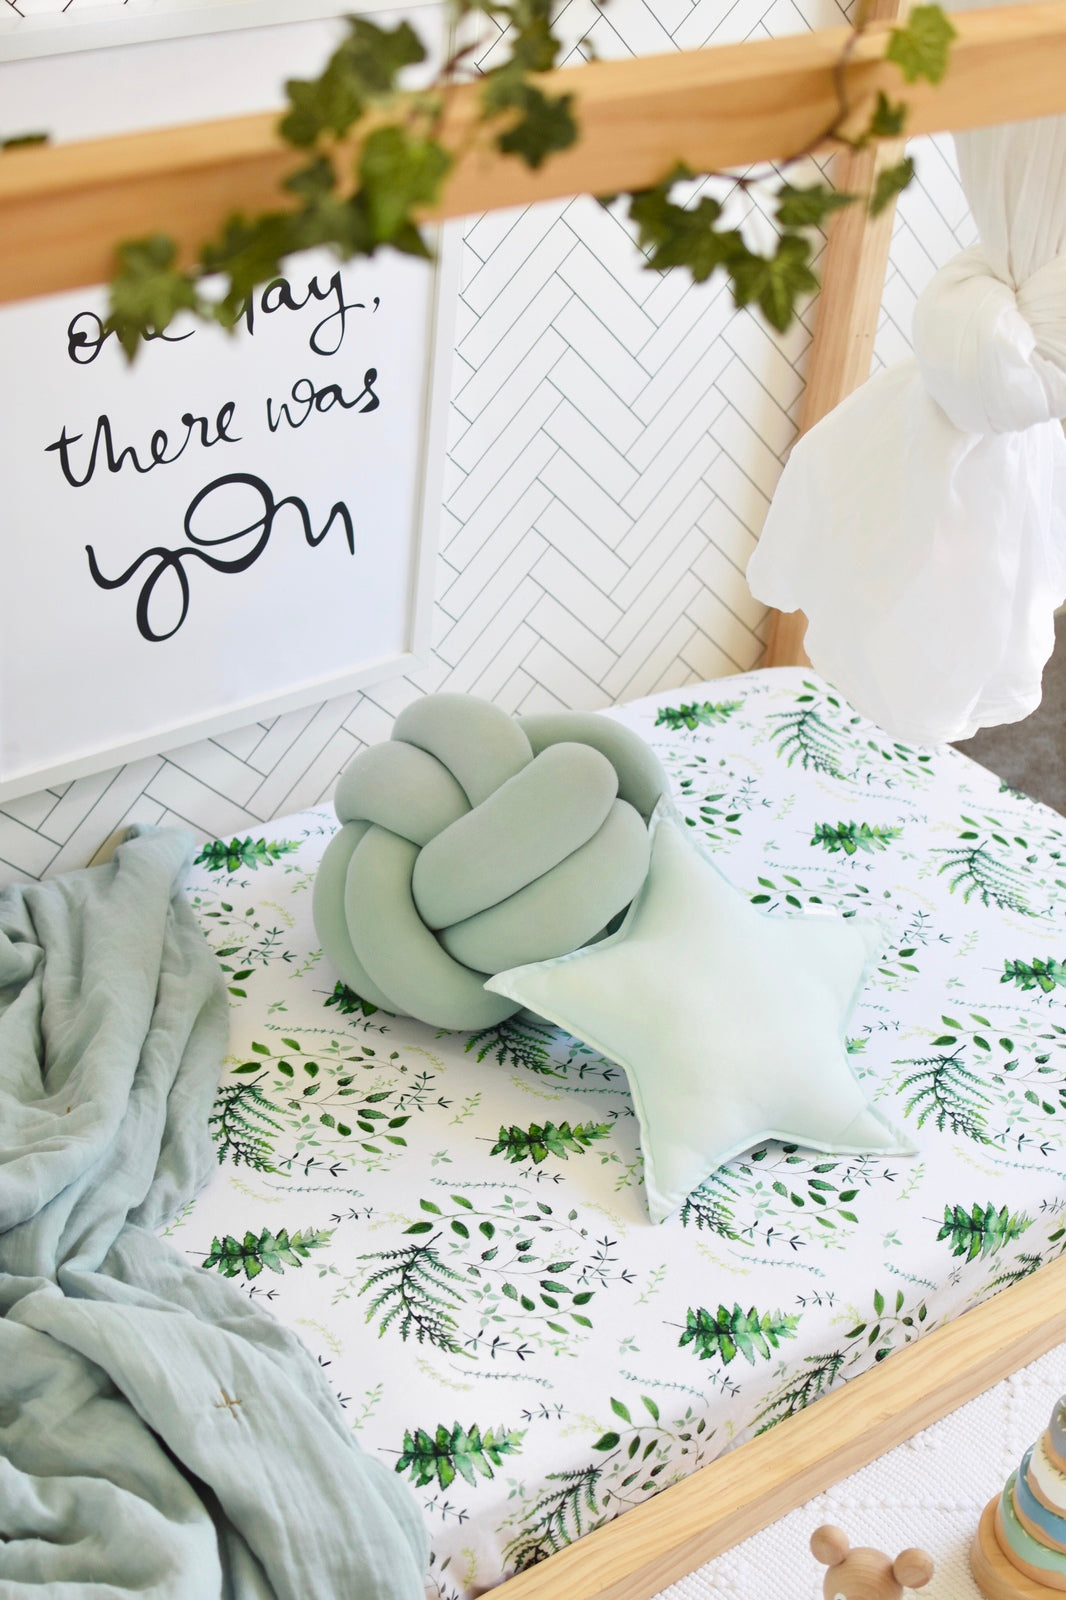 SNUGGLE HUNNY ENCHANTED FITTED COT SHEET